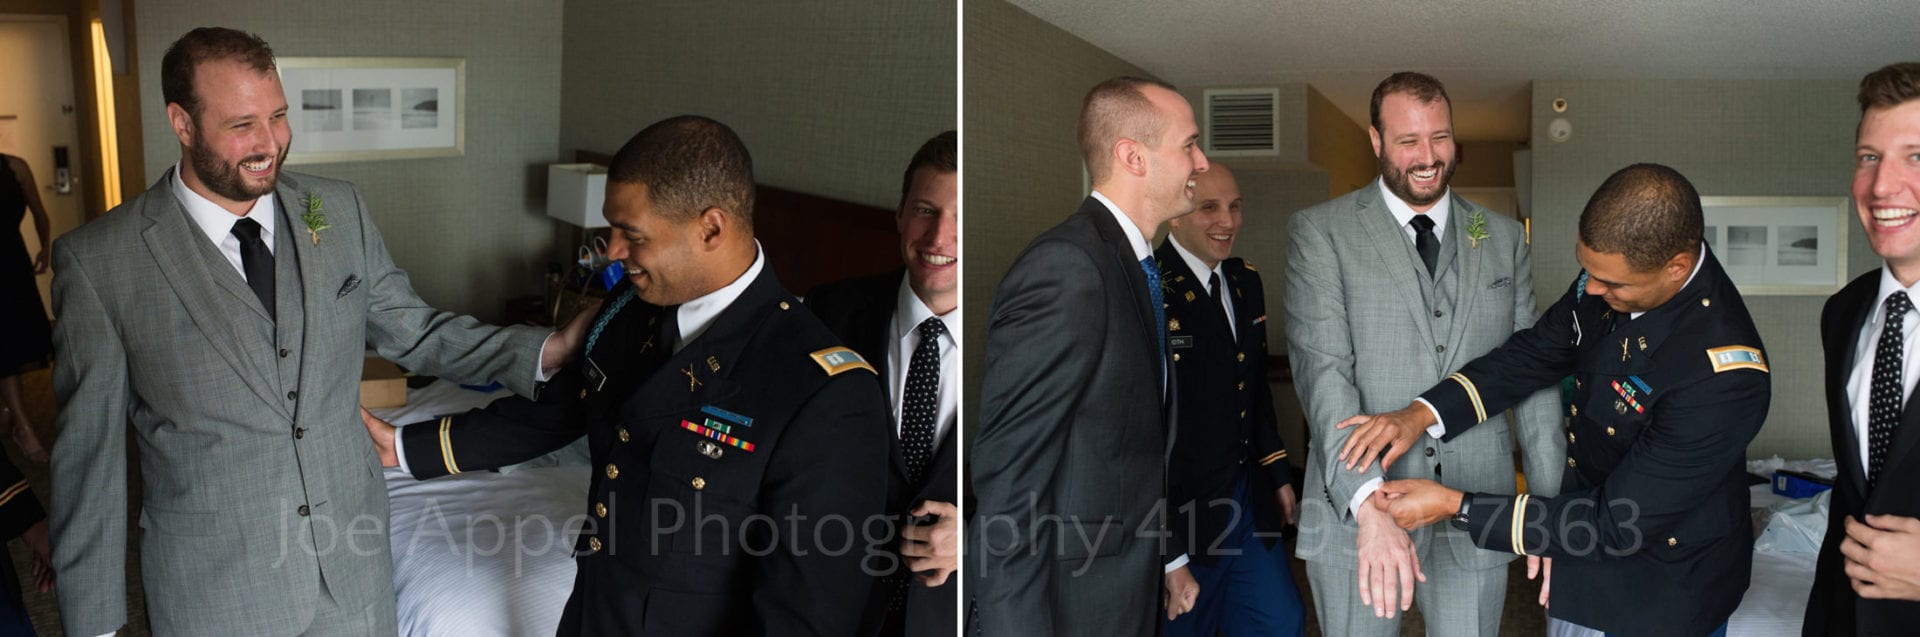 Men in uniform stand around and joke with a groom wearing a gray suit.